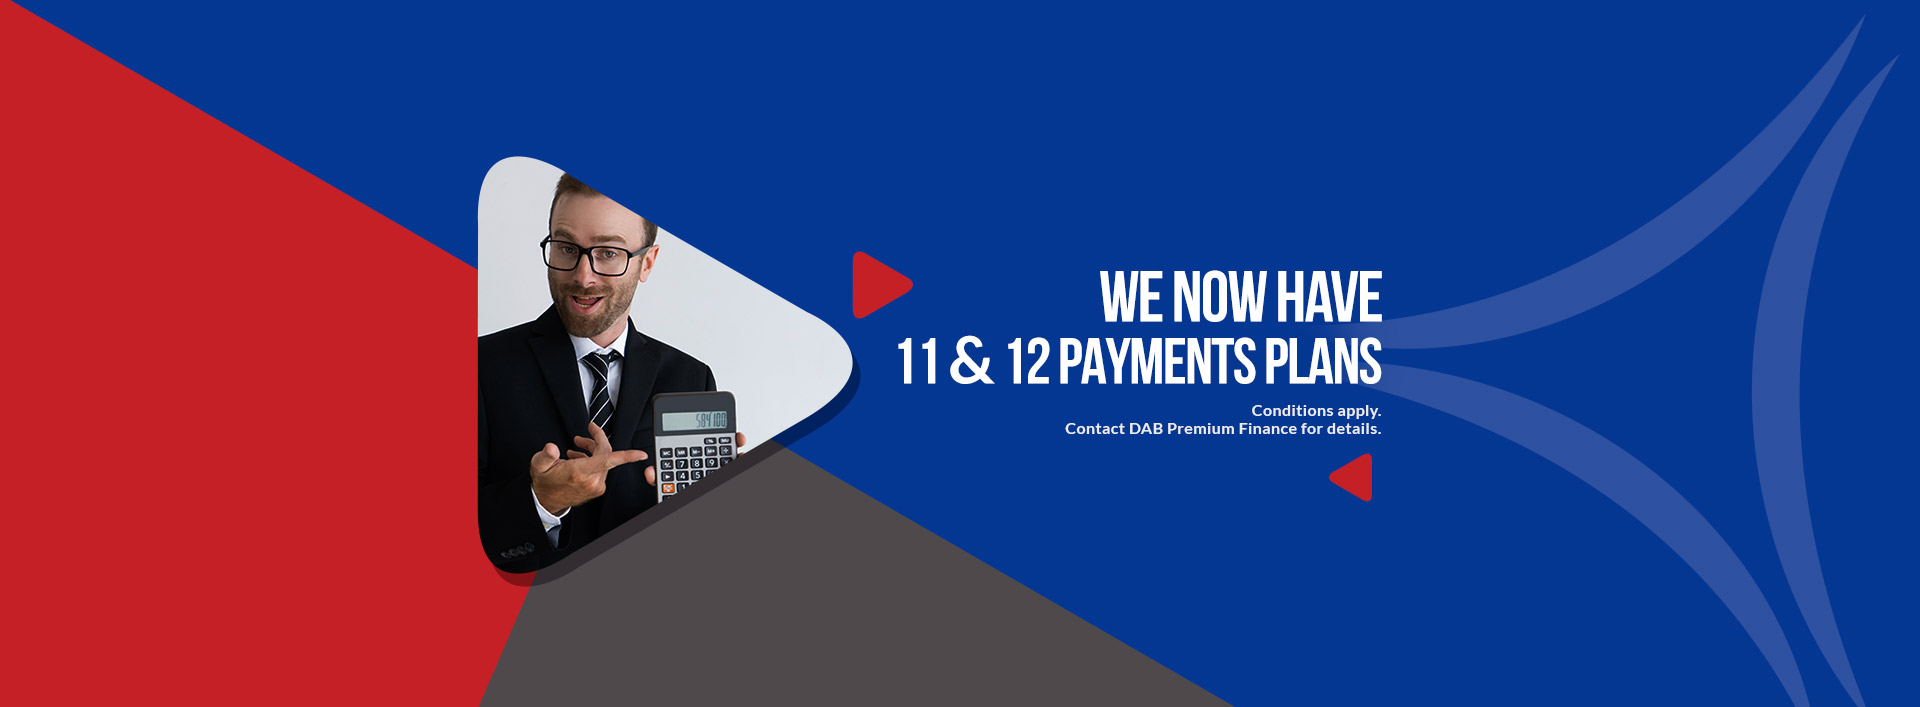 11 and 12 payments plans